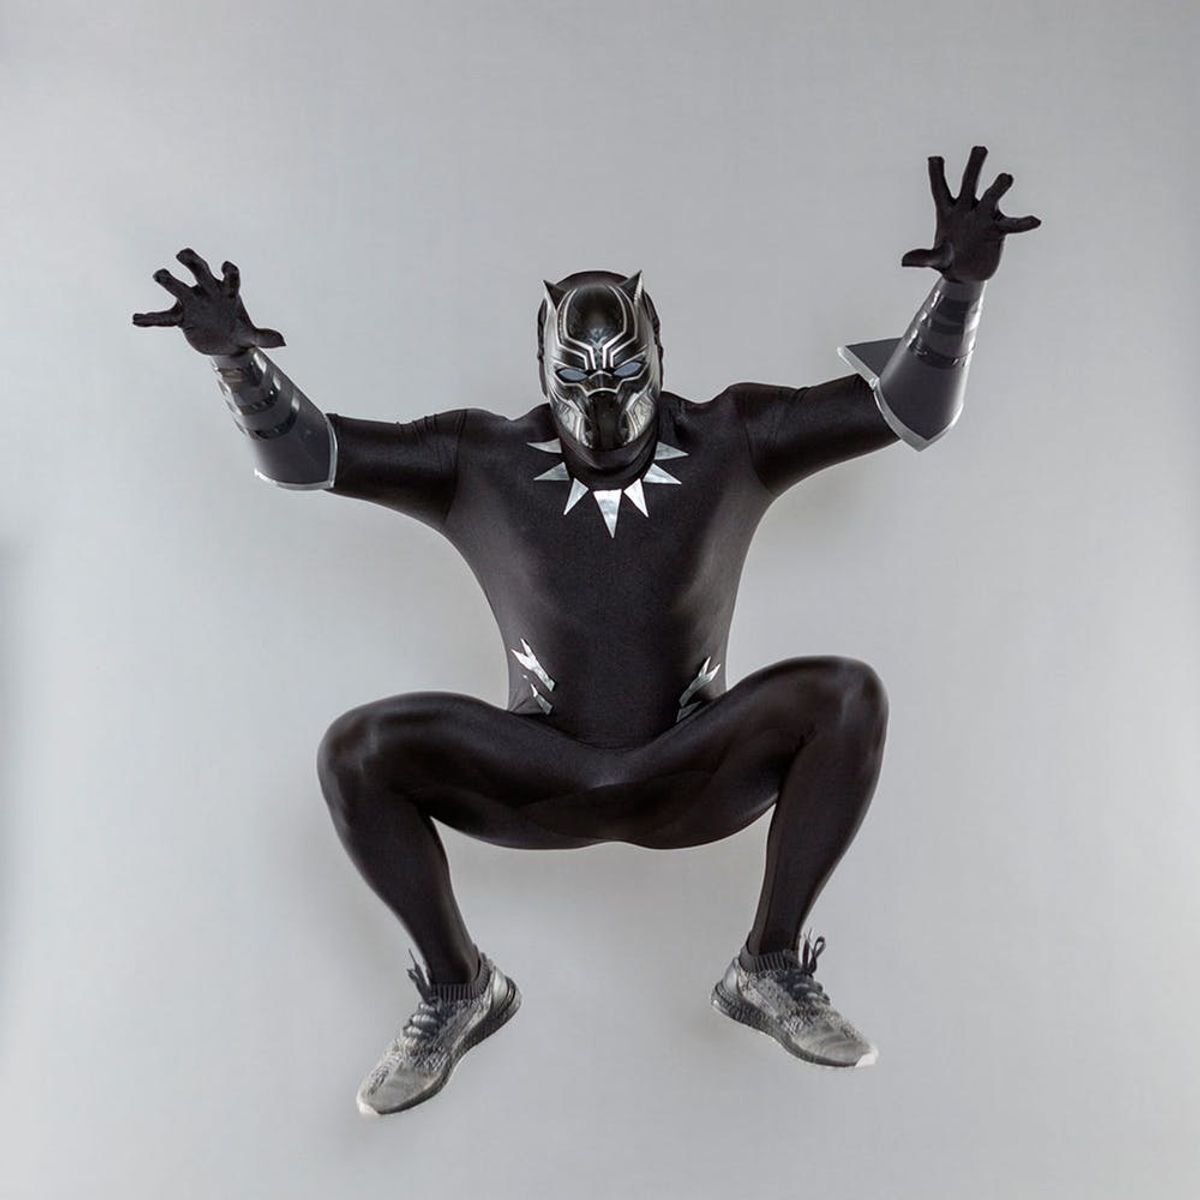 Be the King of Wakanda This Halloween by Dressing Up As Marvel’s Black Panther